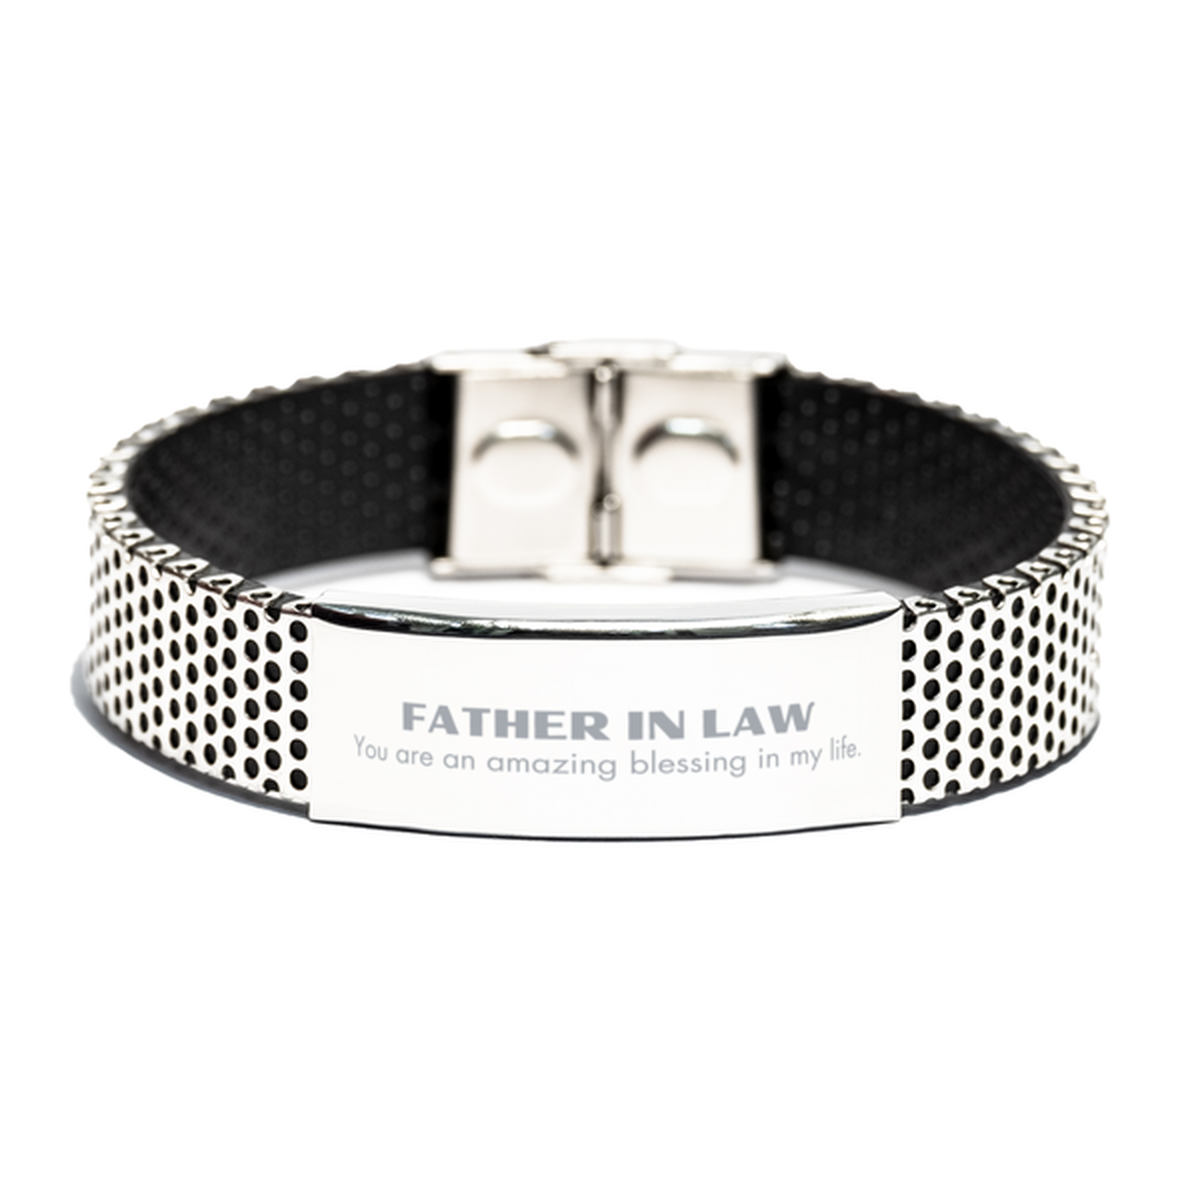 Father In Law Stainless Steel Bracelet, You are an amazing blessing in my life, Thank You Gifts For Father In Law, Inspirational Birthday Christmas Unique Gifts For Father In Law